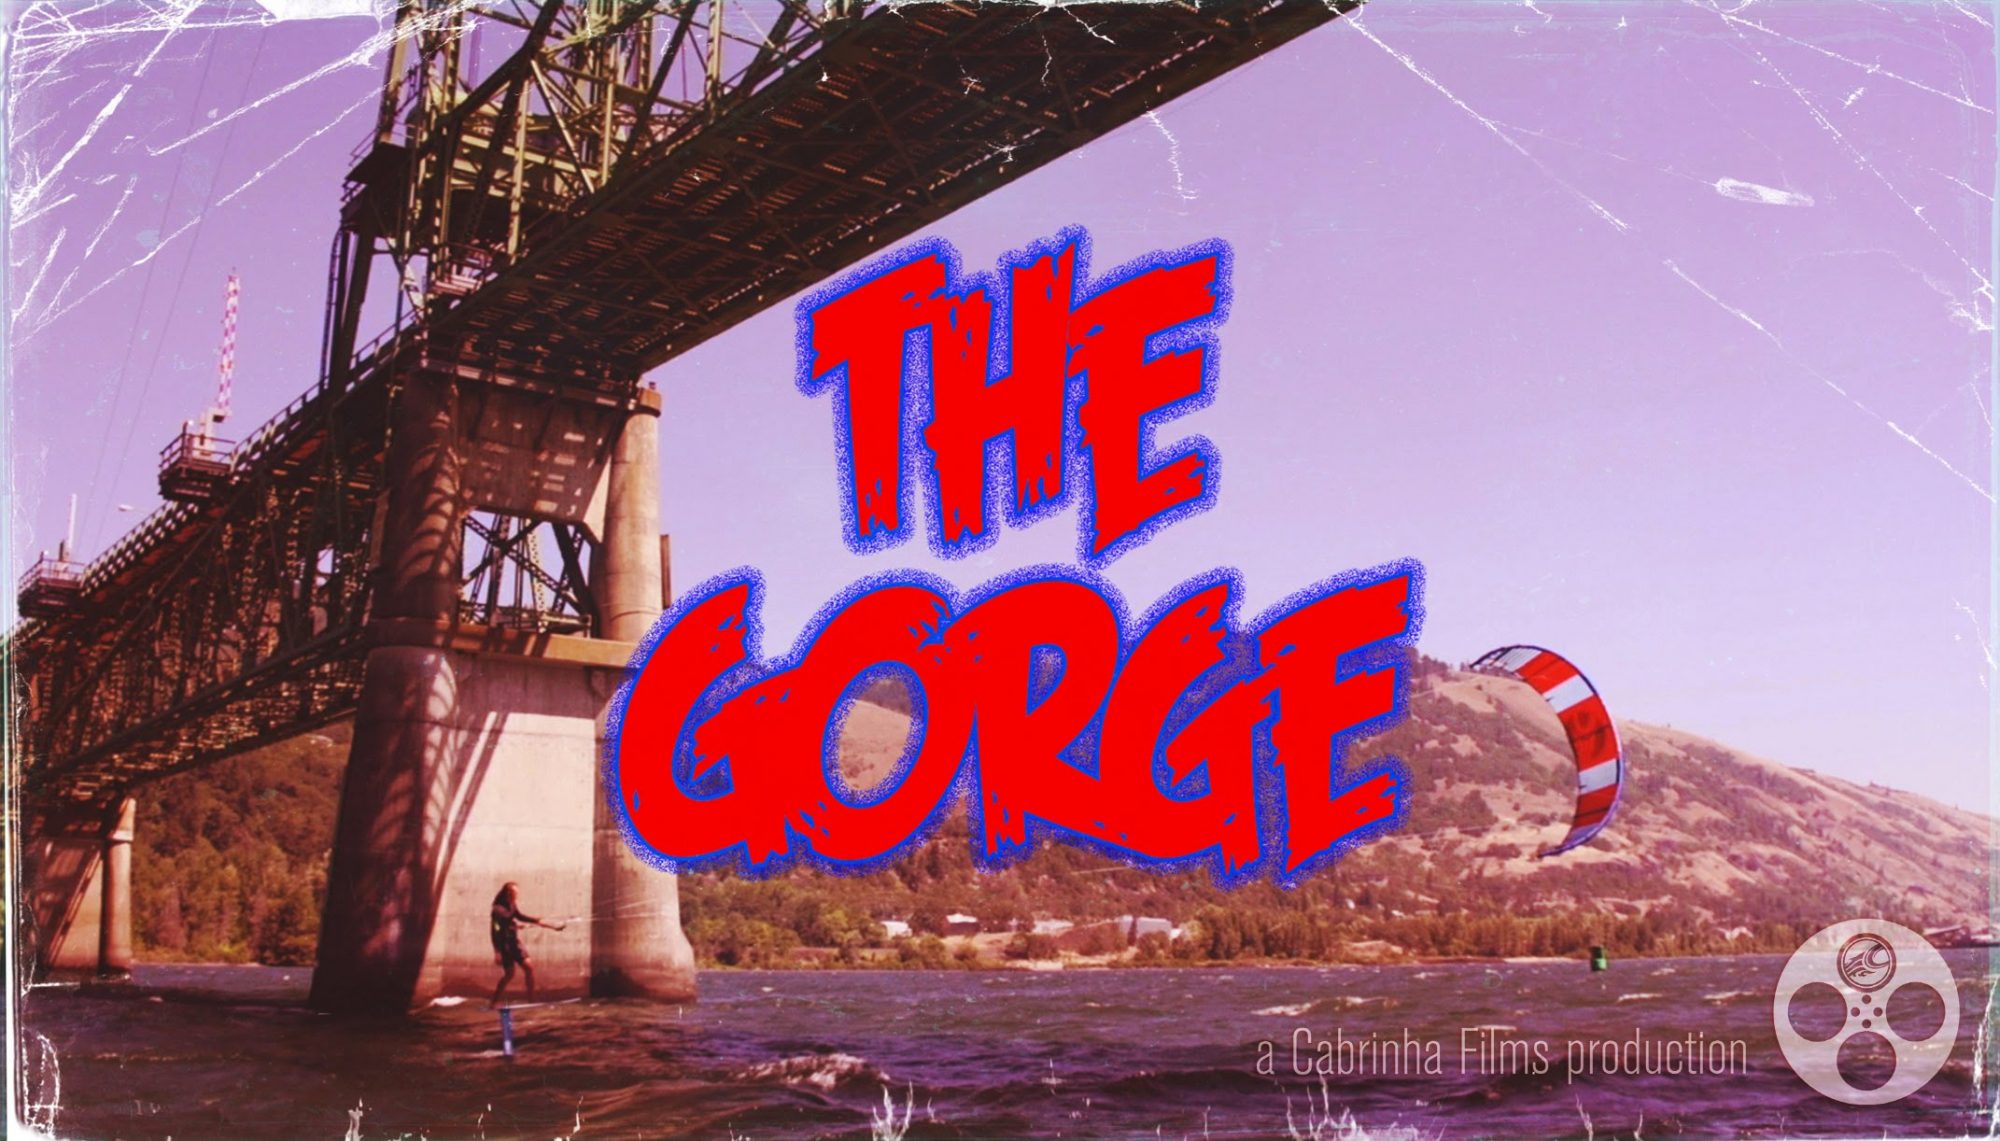 this is kiteboarding the gorge - THIS is Kiteboarding - "The Gorge"